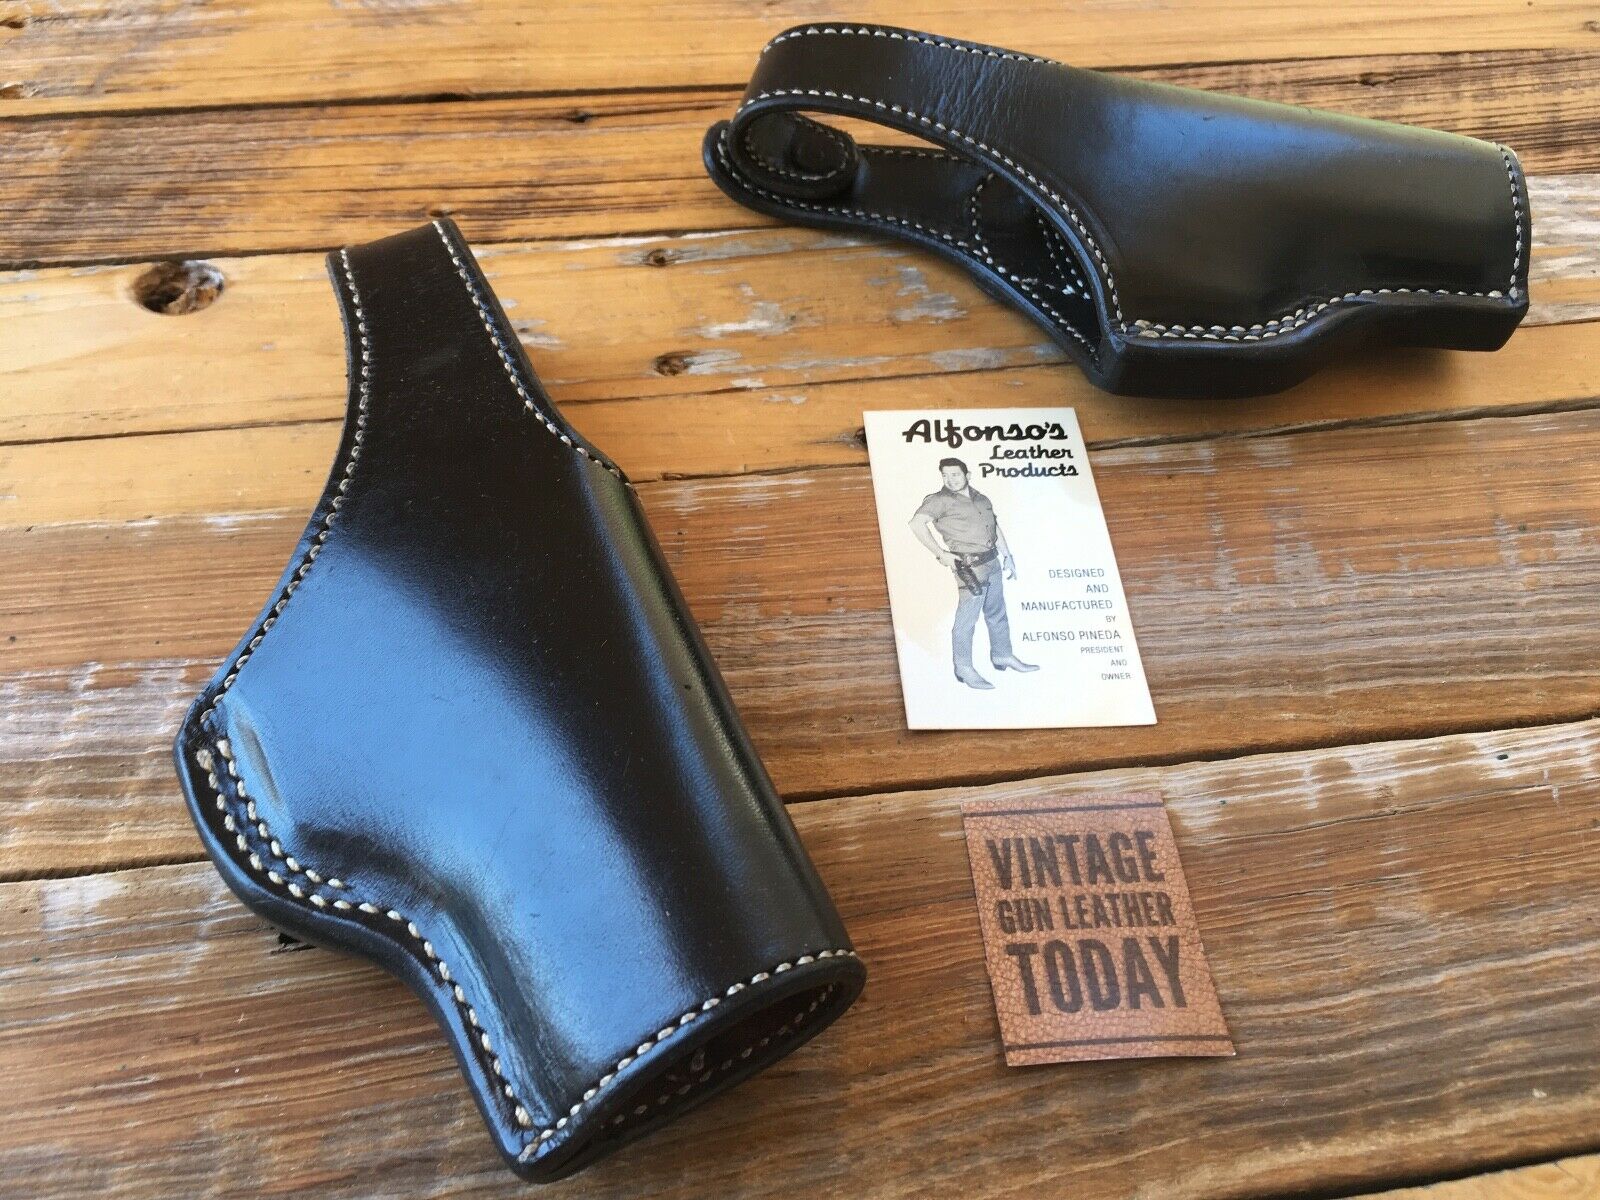 Alfonso's of Hollywood Black Leather Suede Lined Holster For GLOCK 